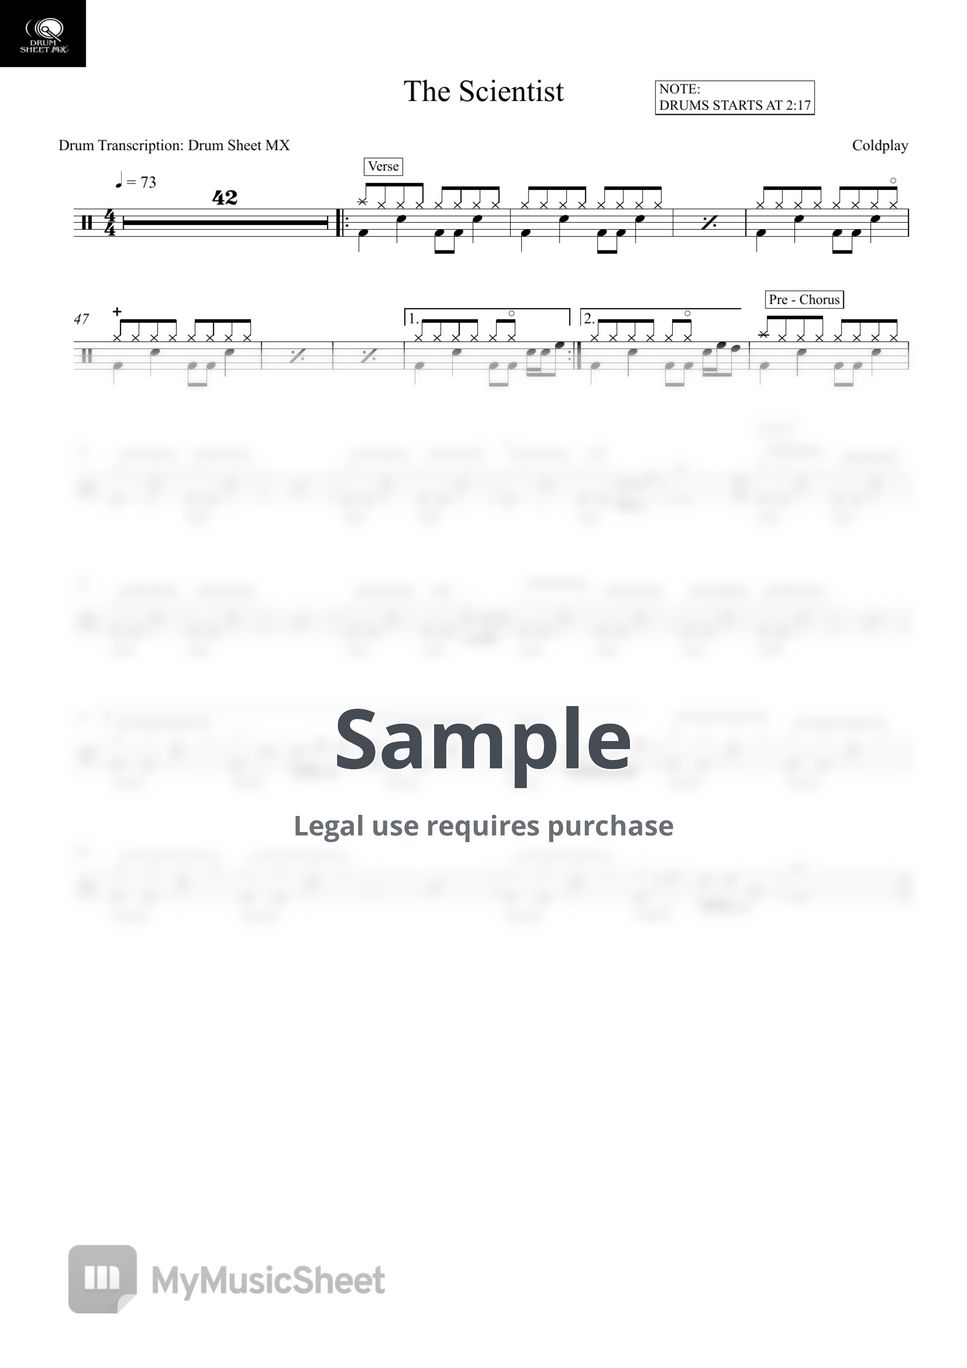 Coldplay - The Scientist by Drum Transcription: Drum Sheet MX